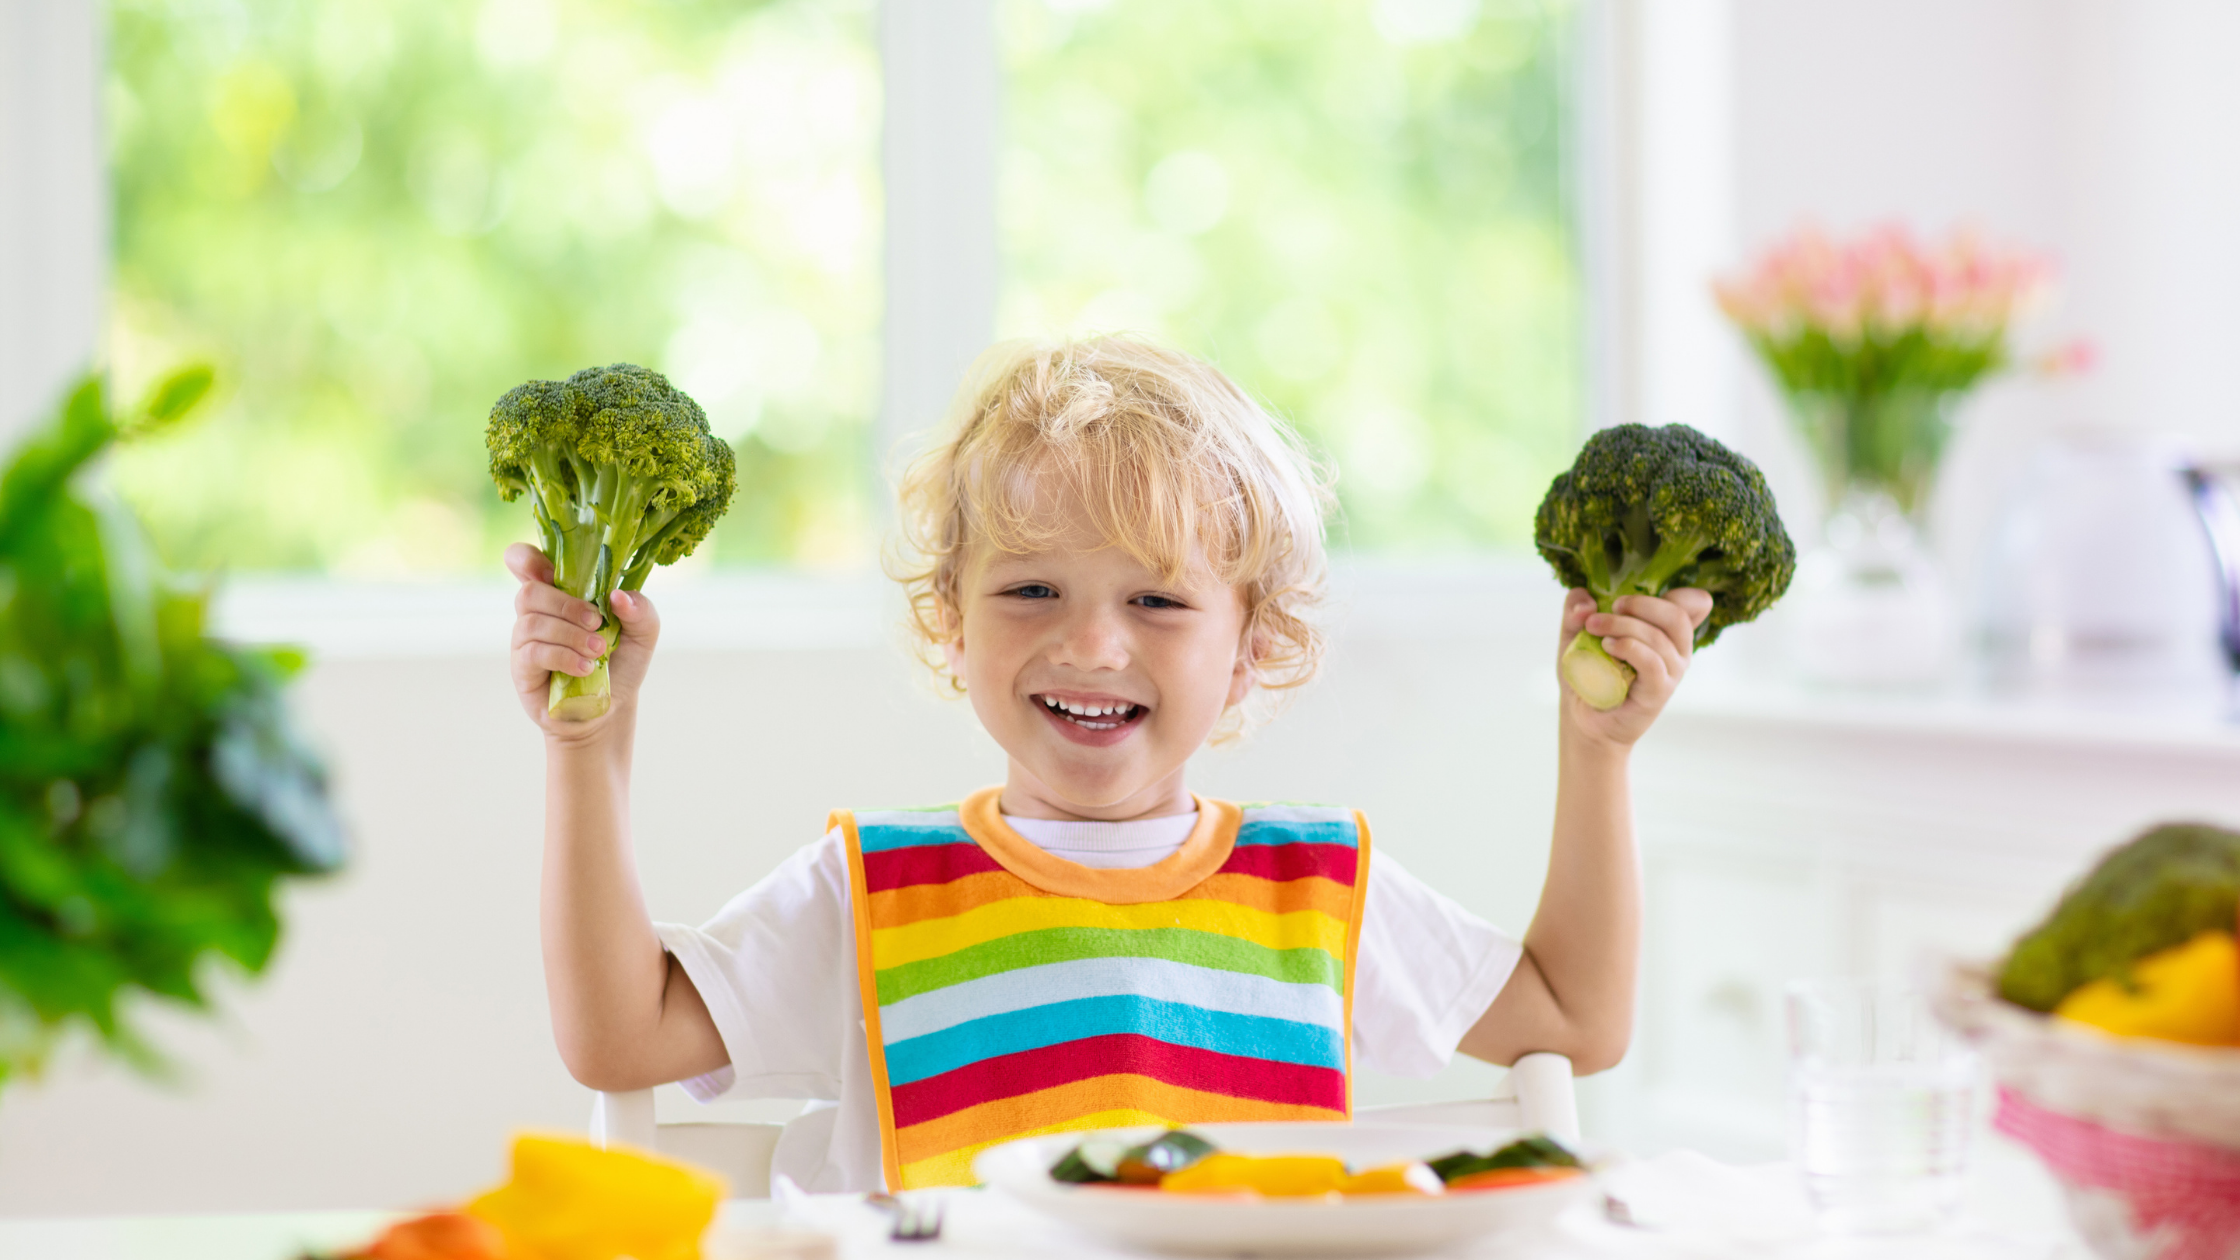 5 Easy Ways to Get Your Kids to Eat More Veggies